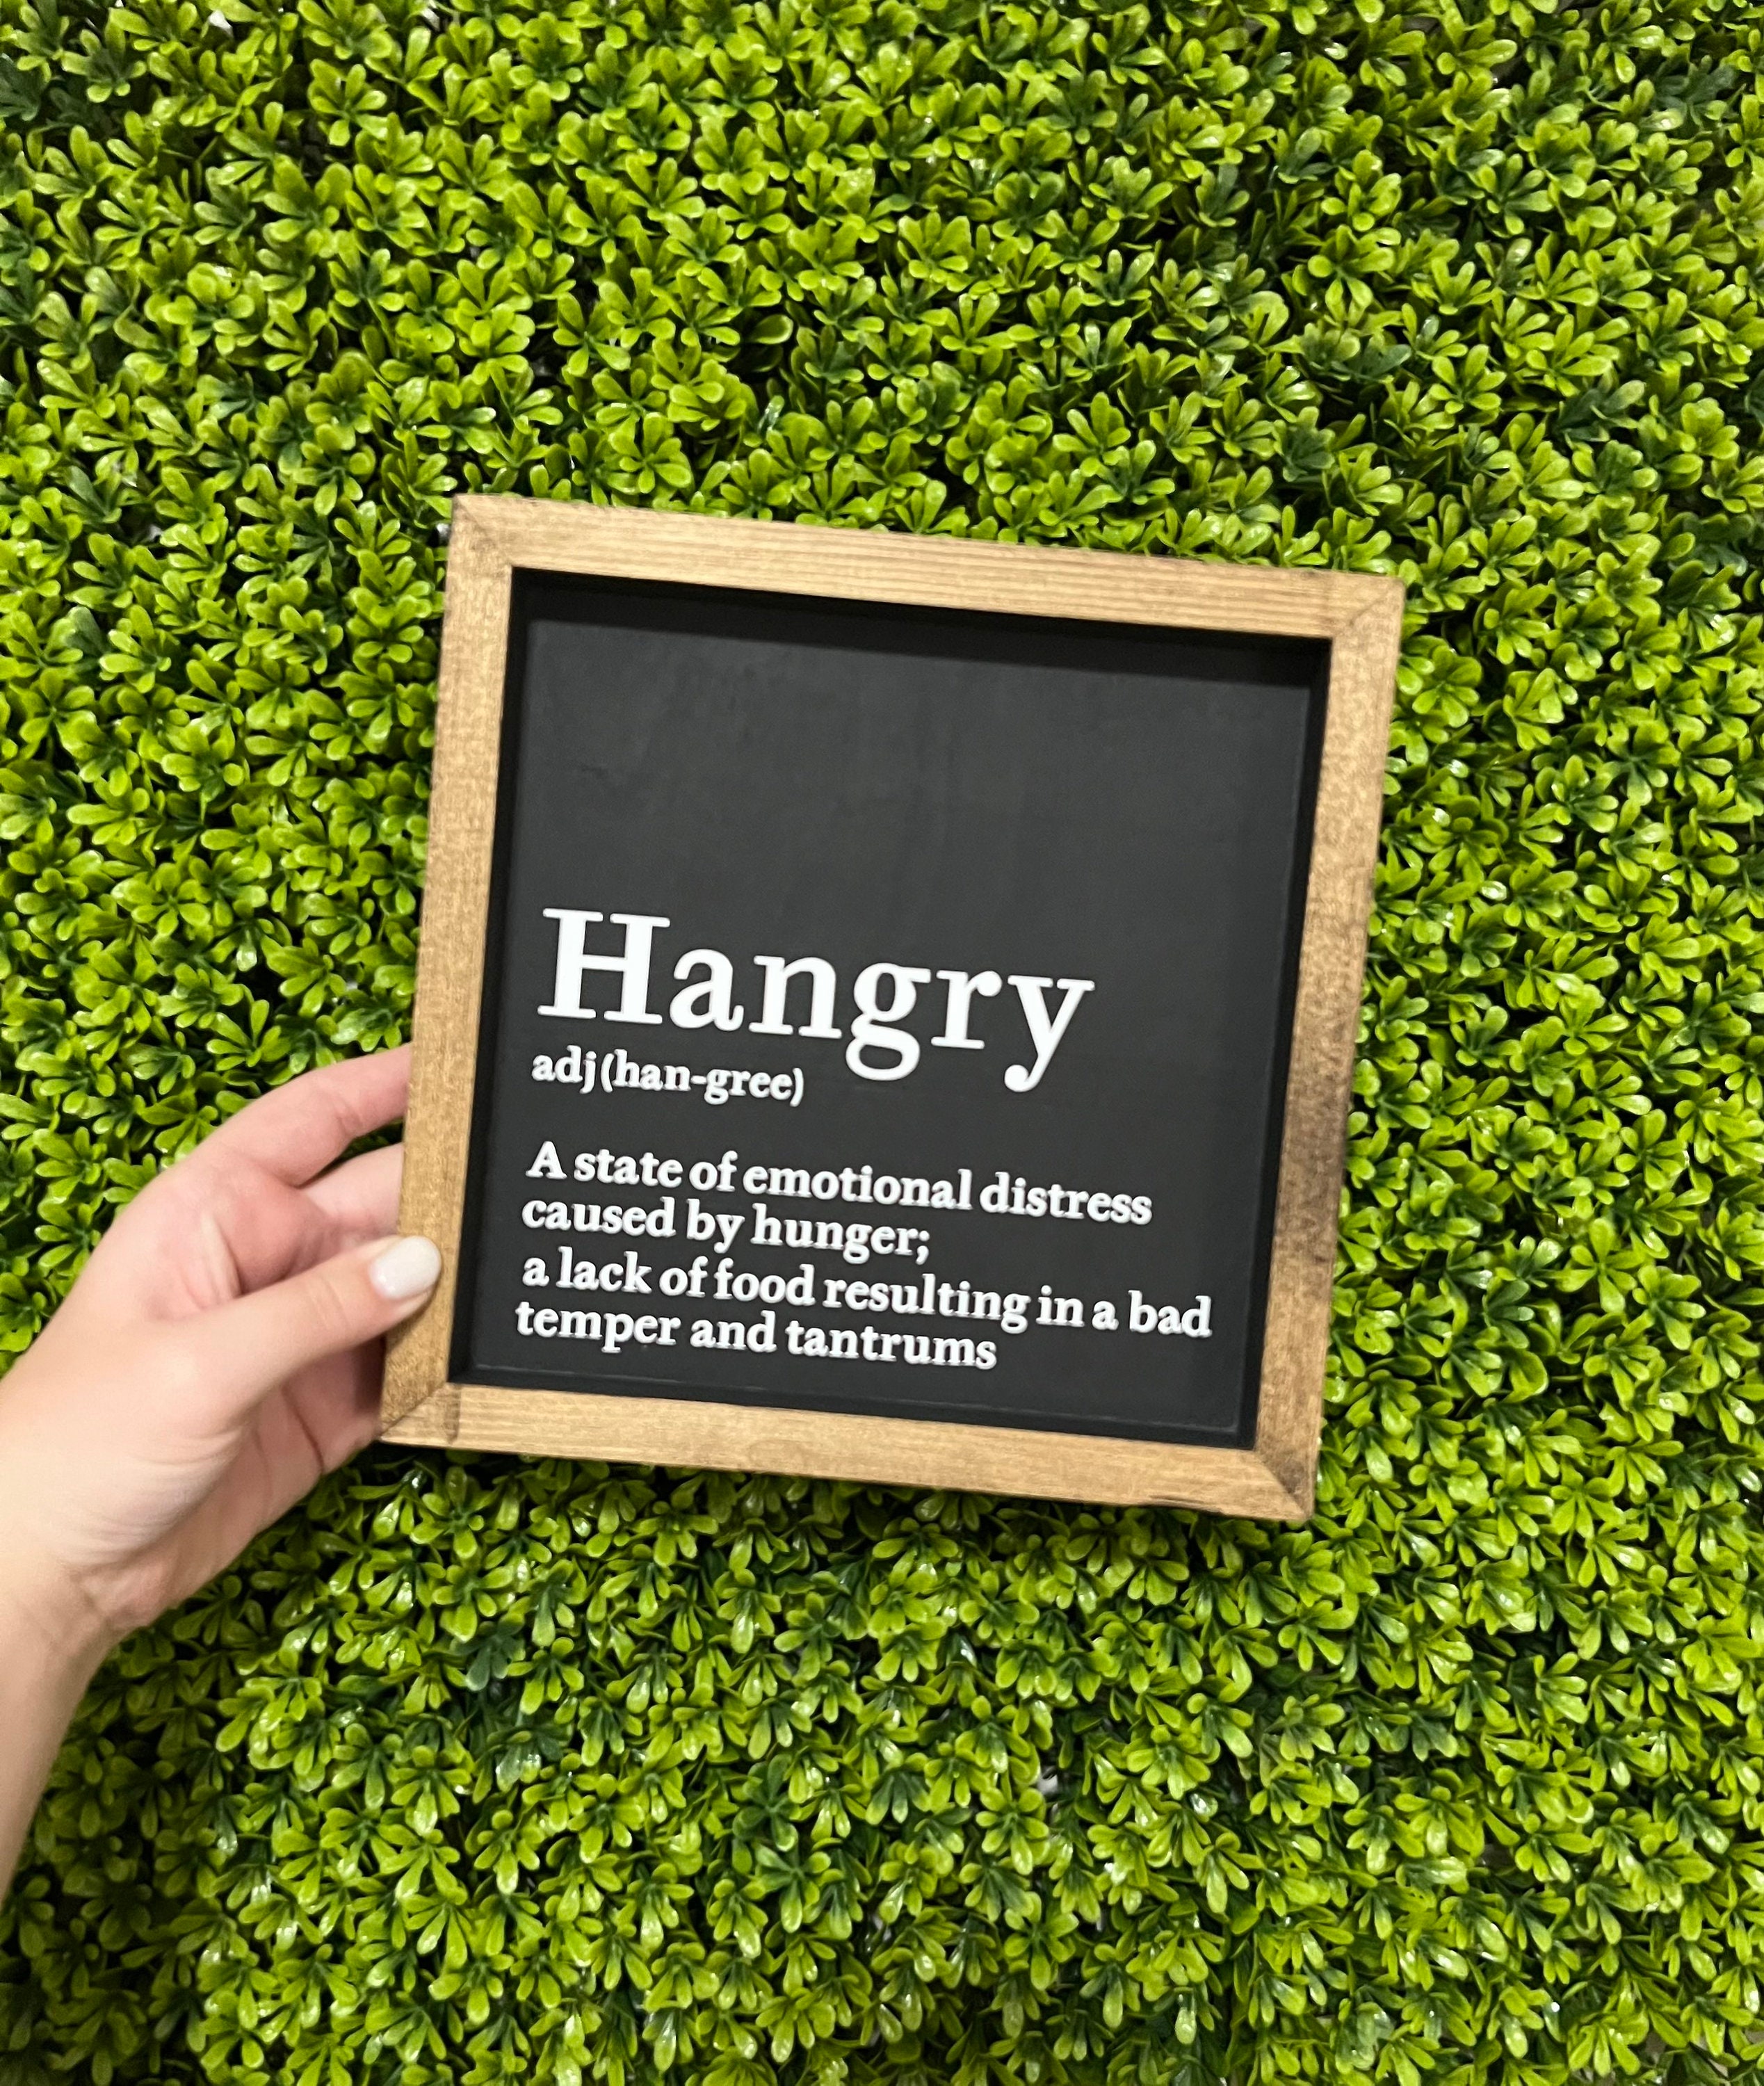 Hangry Definition SVG - EPS- PNG - Dxf - Cutting Board Graphic - Kitchen  Sign Graphic - Cut File - Vector File - Glowforge Tested - Cricut